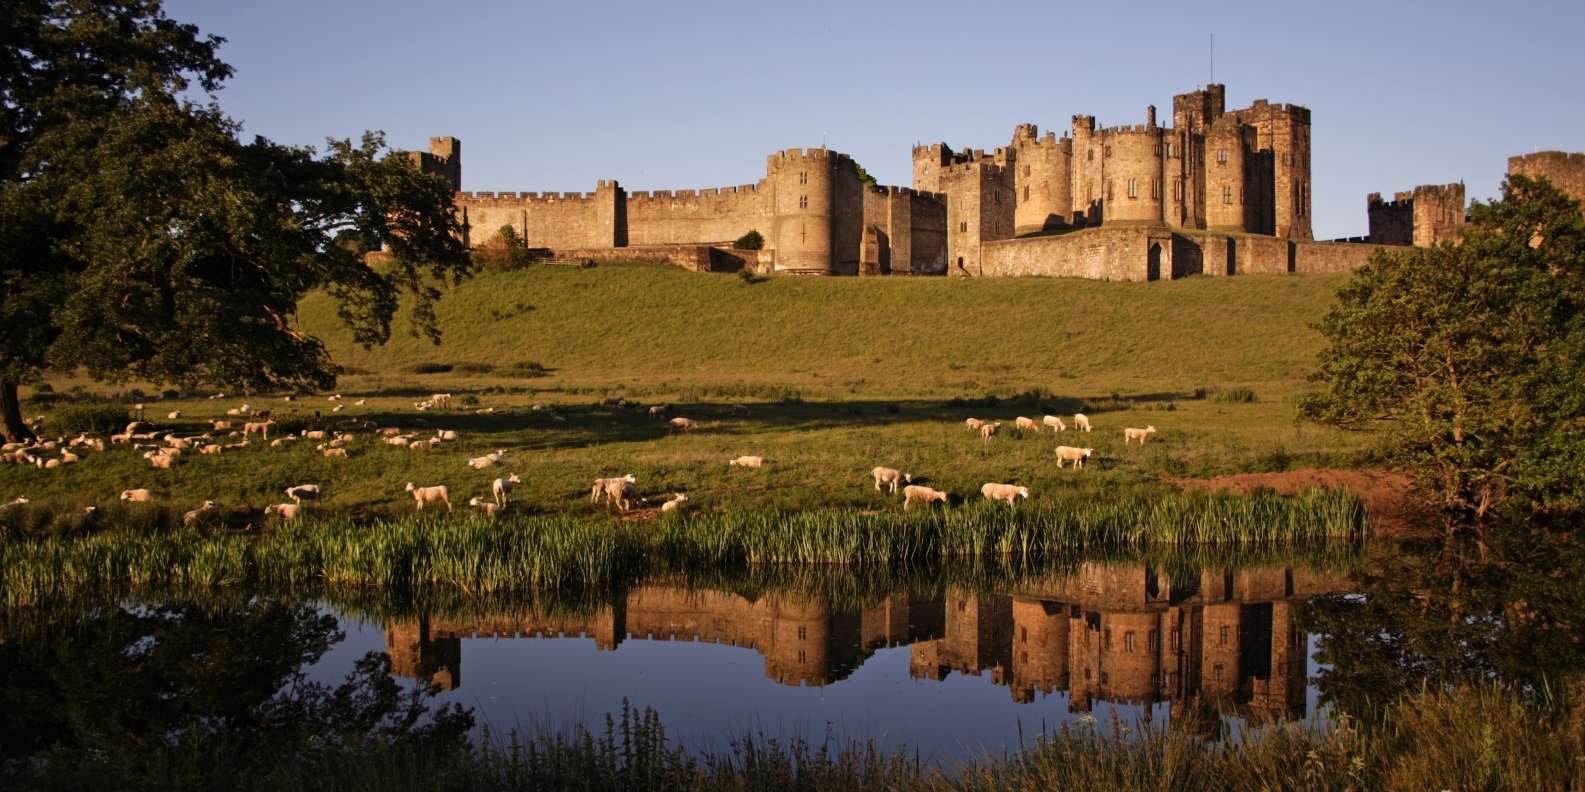 What to do in Alnwick